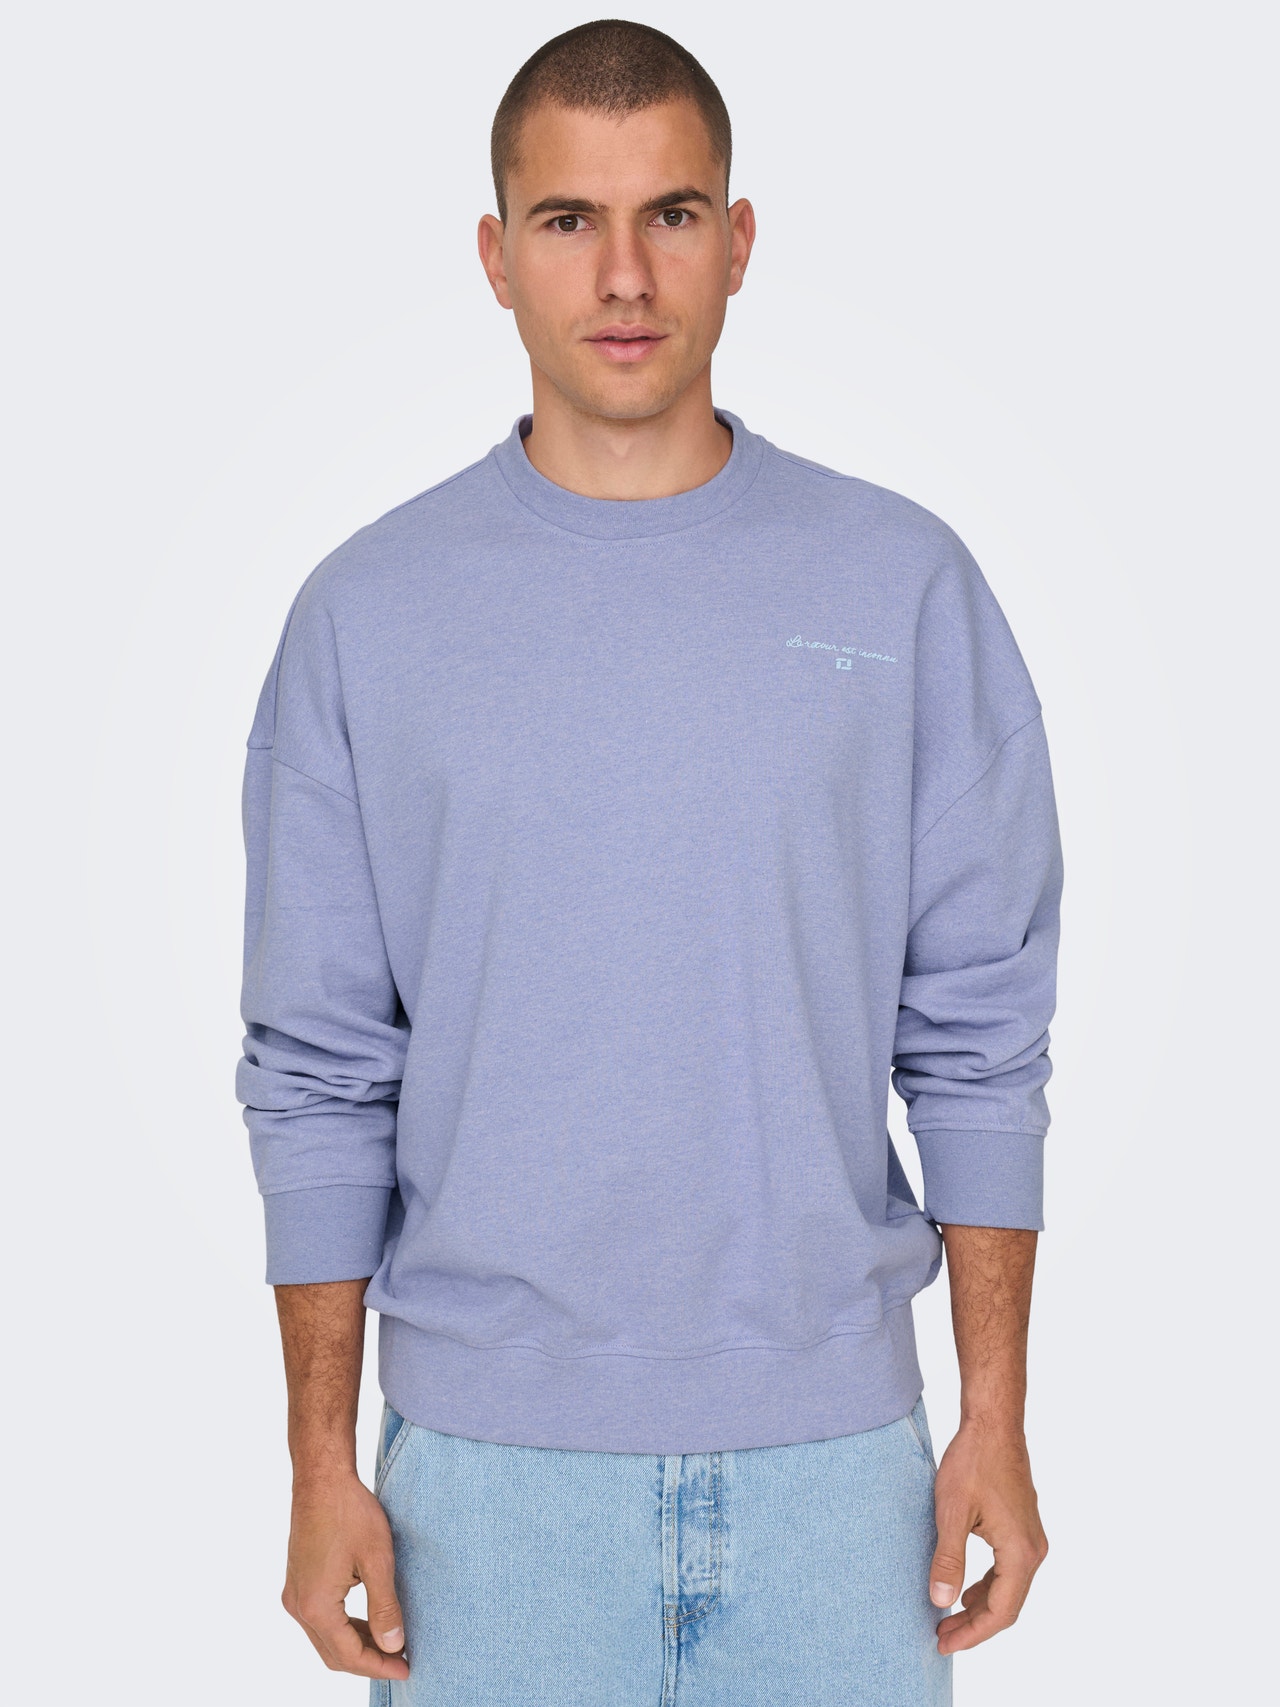 ONLY & SONS Relaxed Fit Crew neck Dropped shoulders Sweatshirt -Jacaranda - 22025298